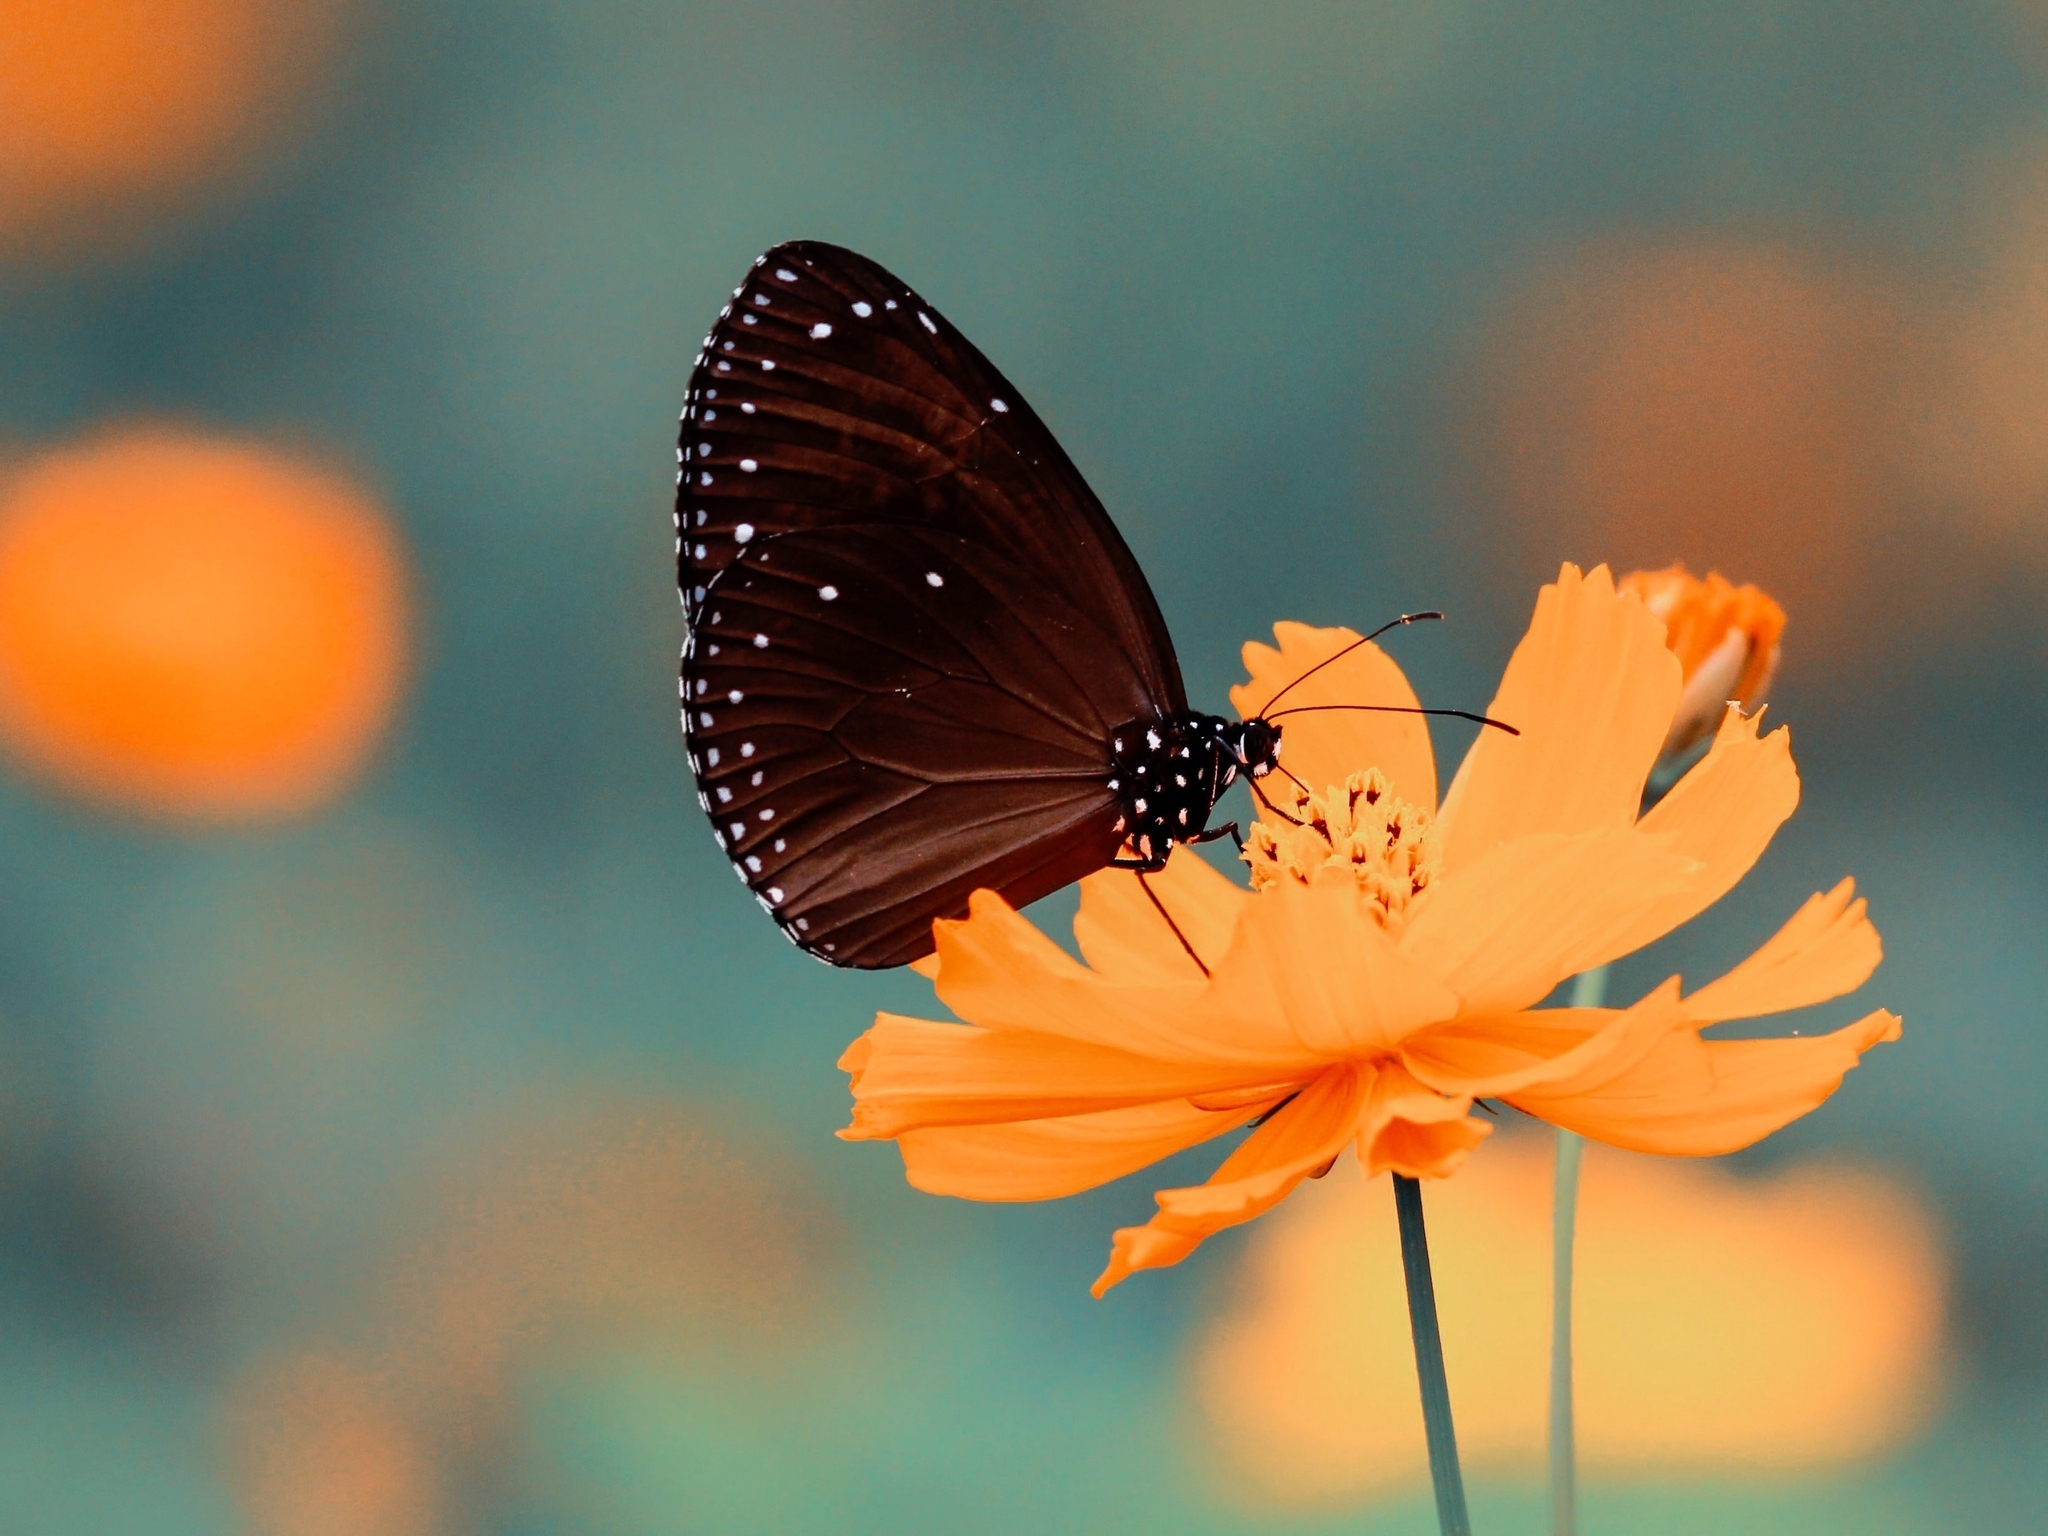 Image: Butterfly, flower, yellow, blurred background